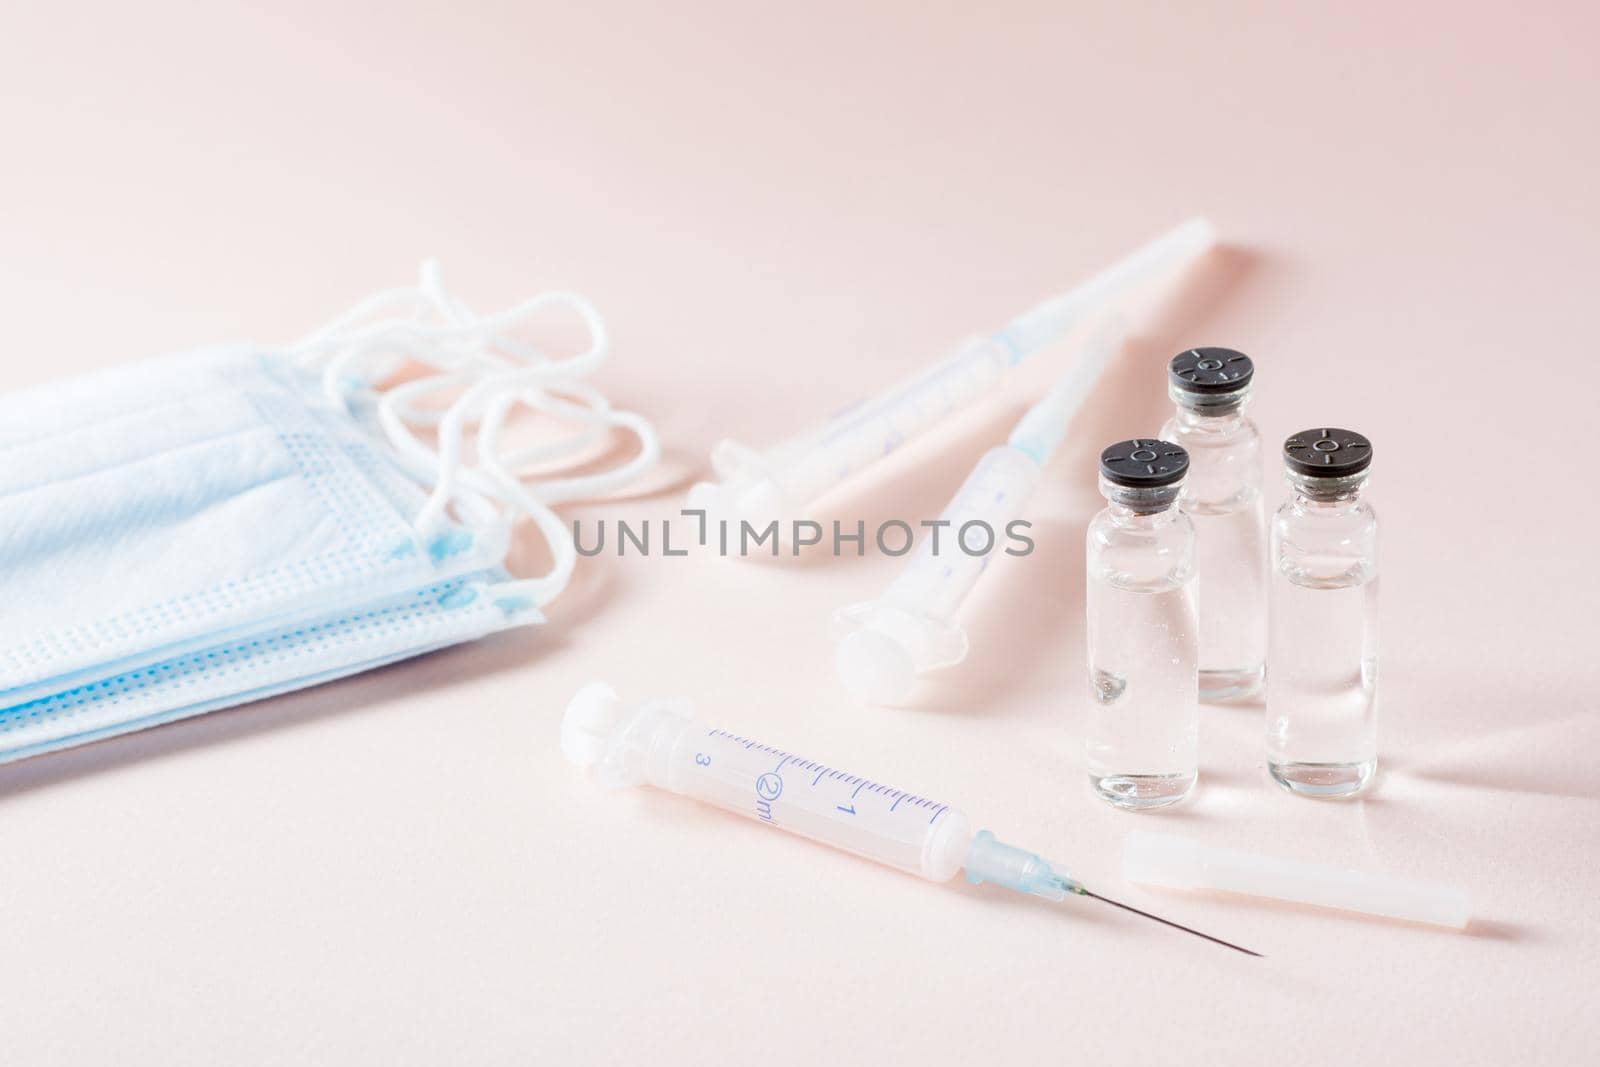 Vaccination and Immunization. Opened syringe in front of glass vials with vaccine, protective masks and clean syringes